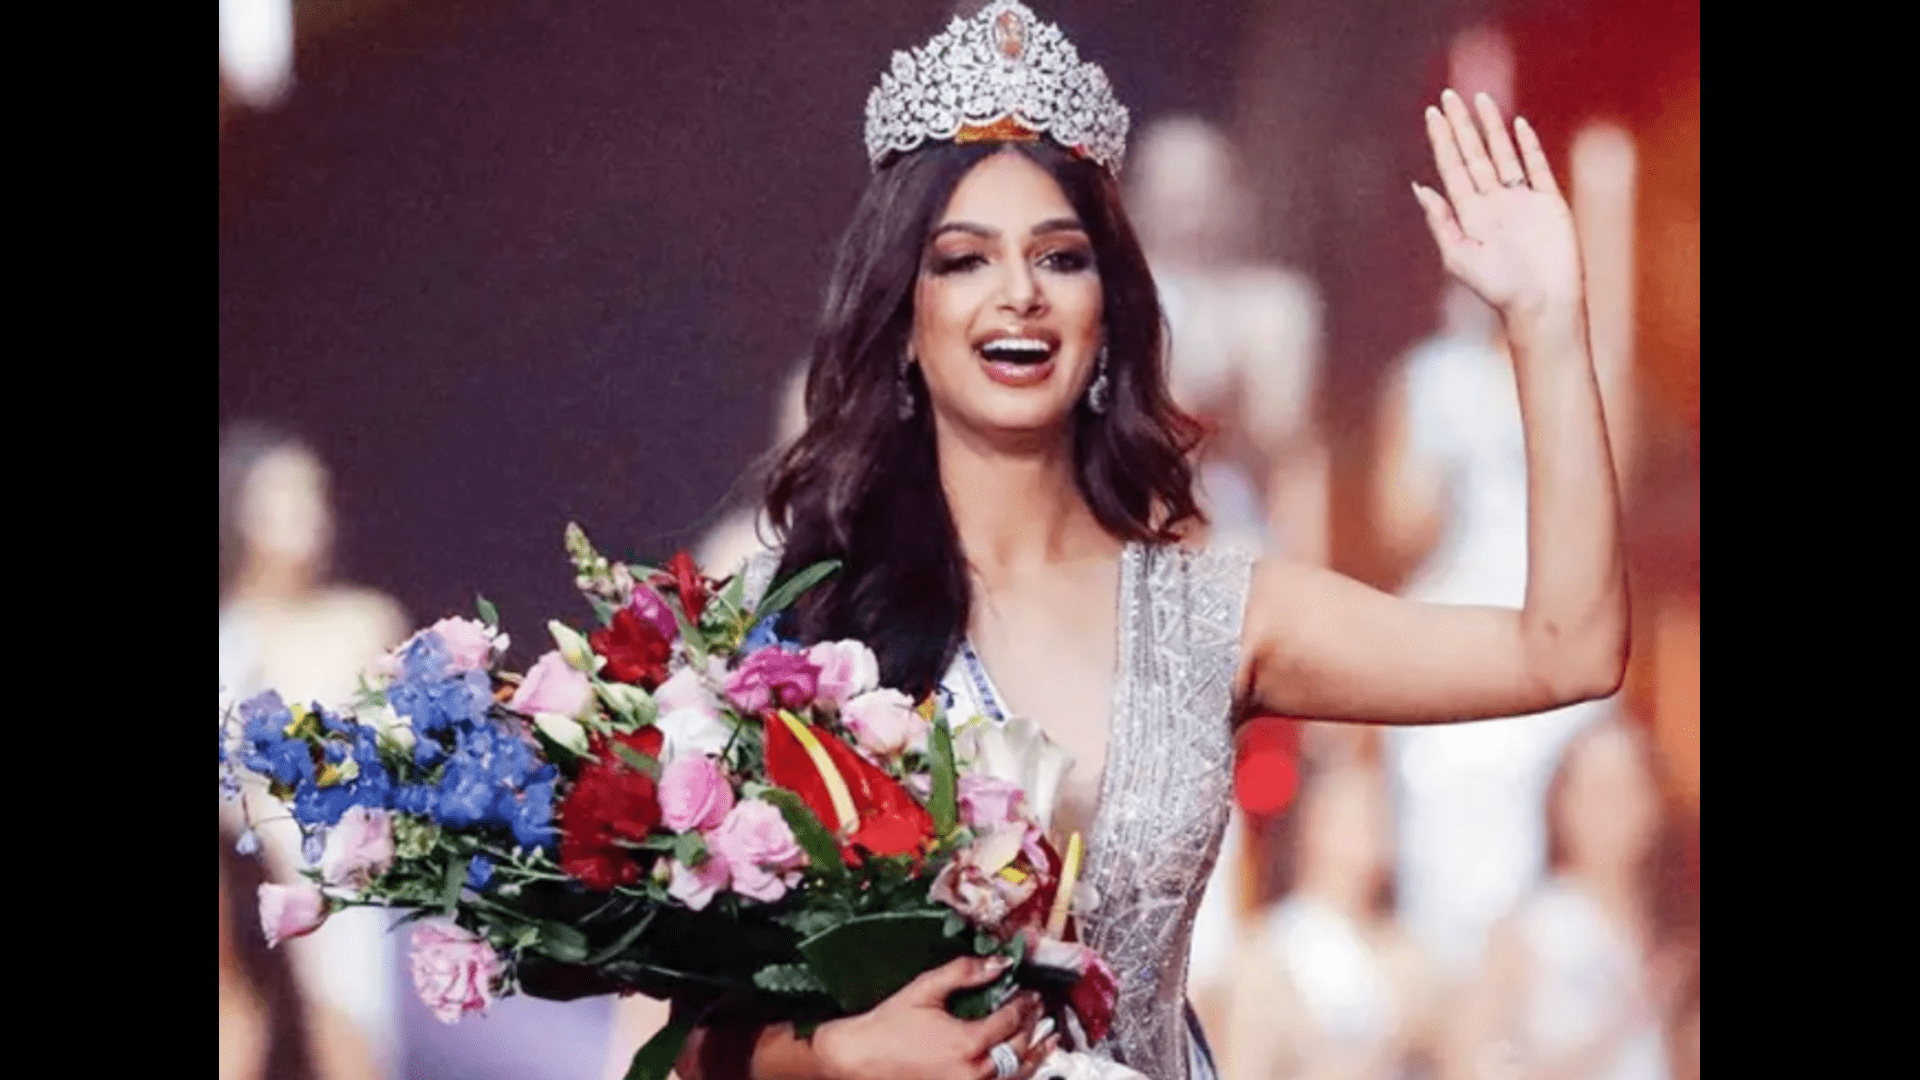 miss-universe-2021-discusses-the-illness-that-drives-her-to-gain-weight